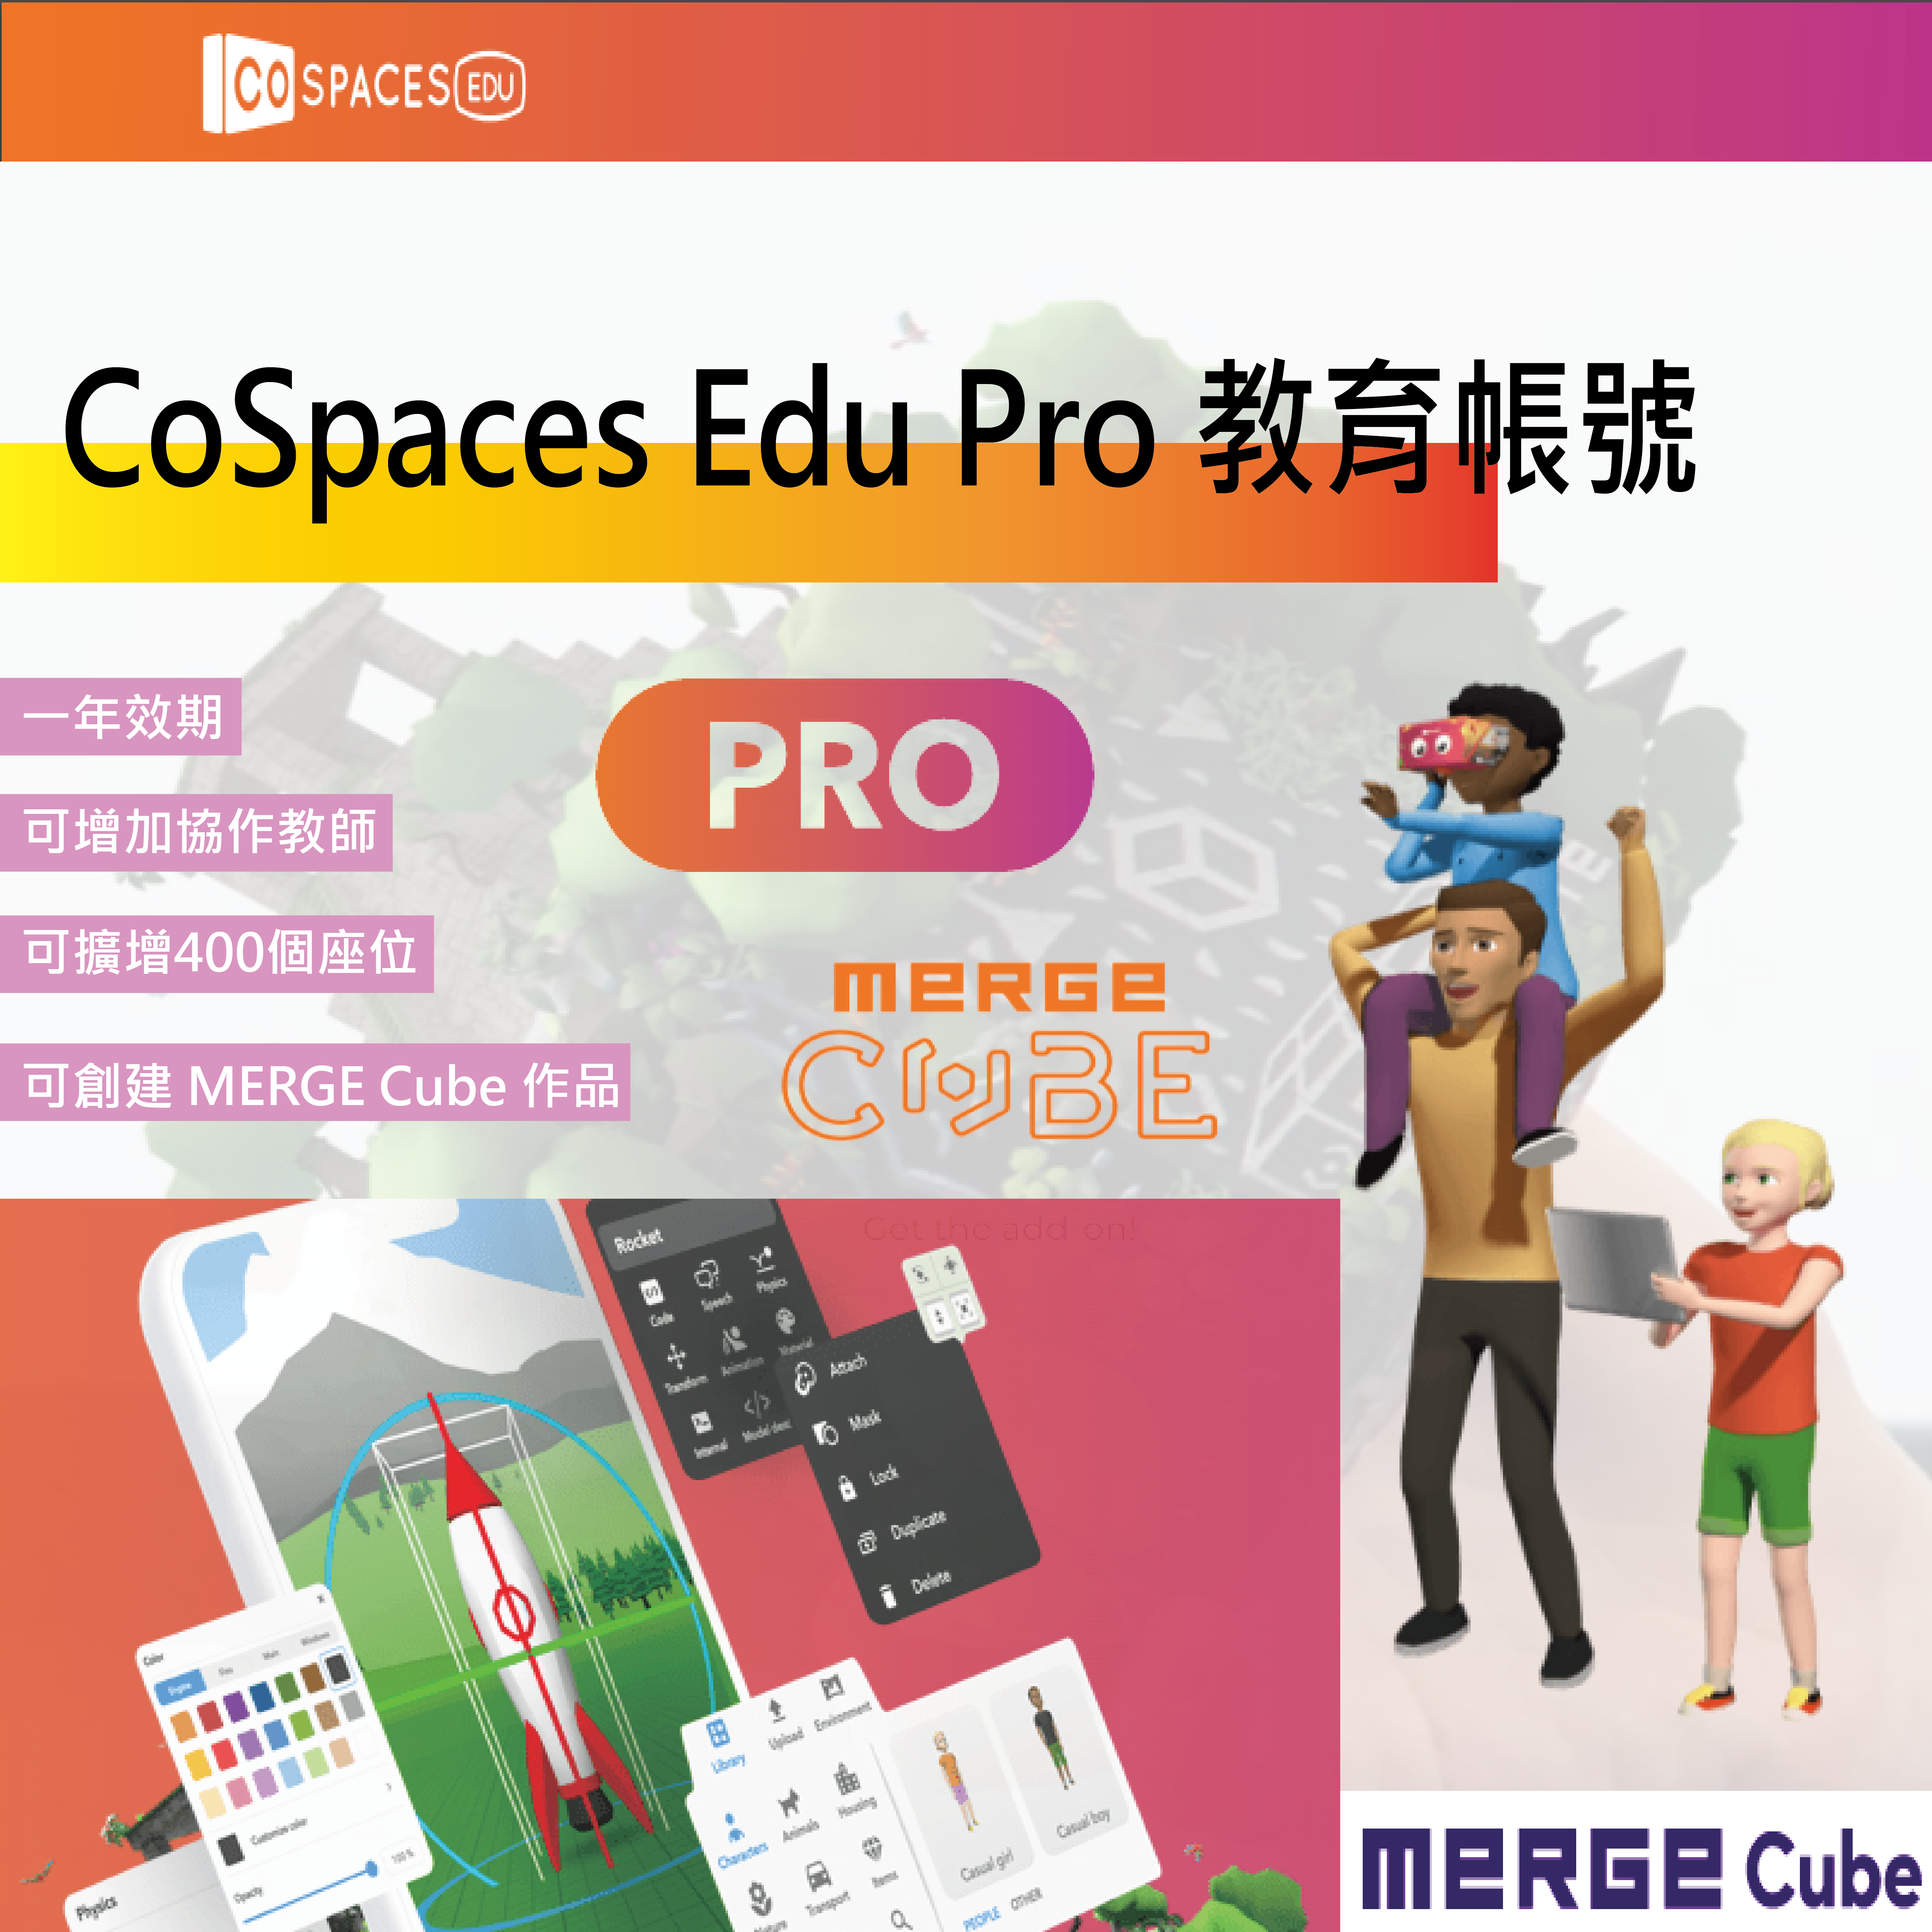 【CSP004】Cospaces 帳號(管理員+Merge Cube add-on)